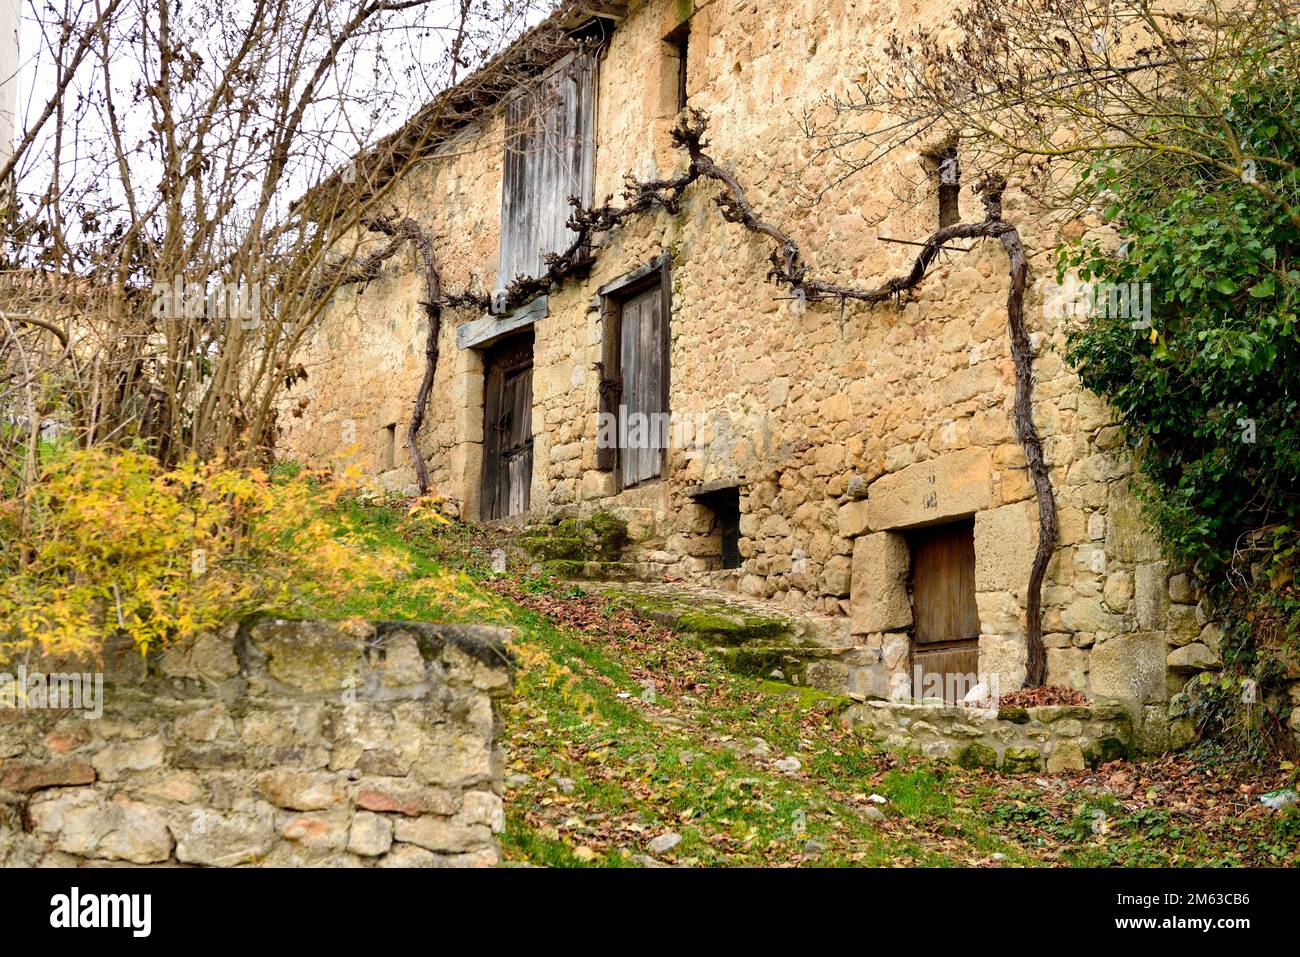 Herrán is a small Medieval Village located in the Tobalina Valley, Burgos,  Spain Stock Photo - Alamy